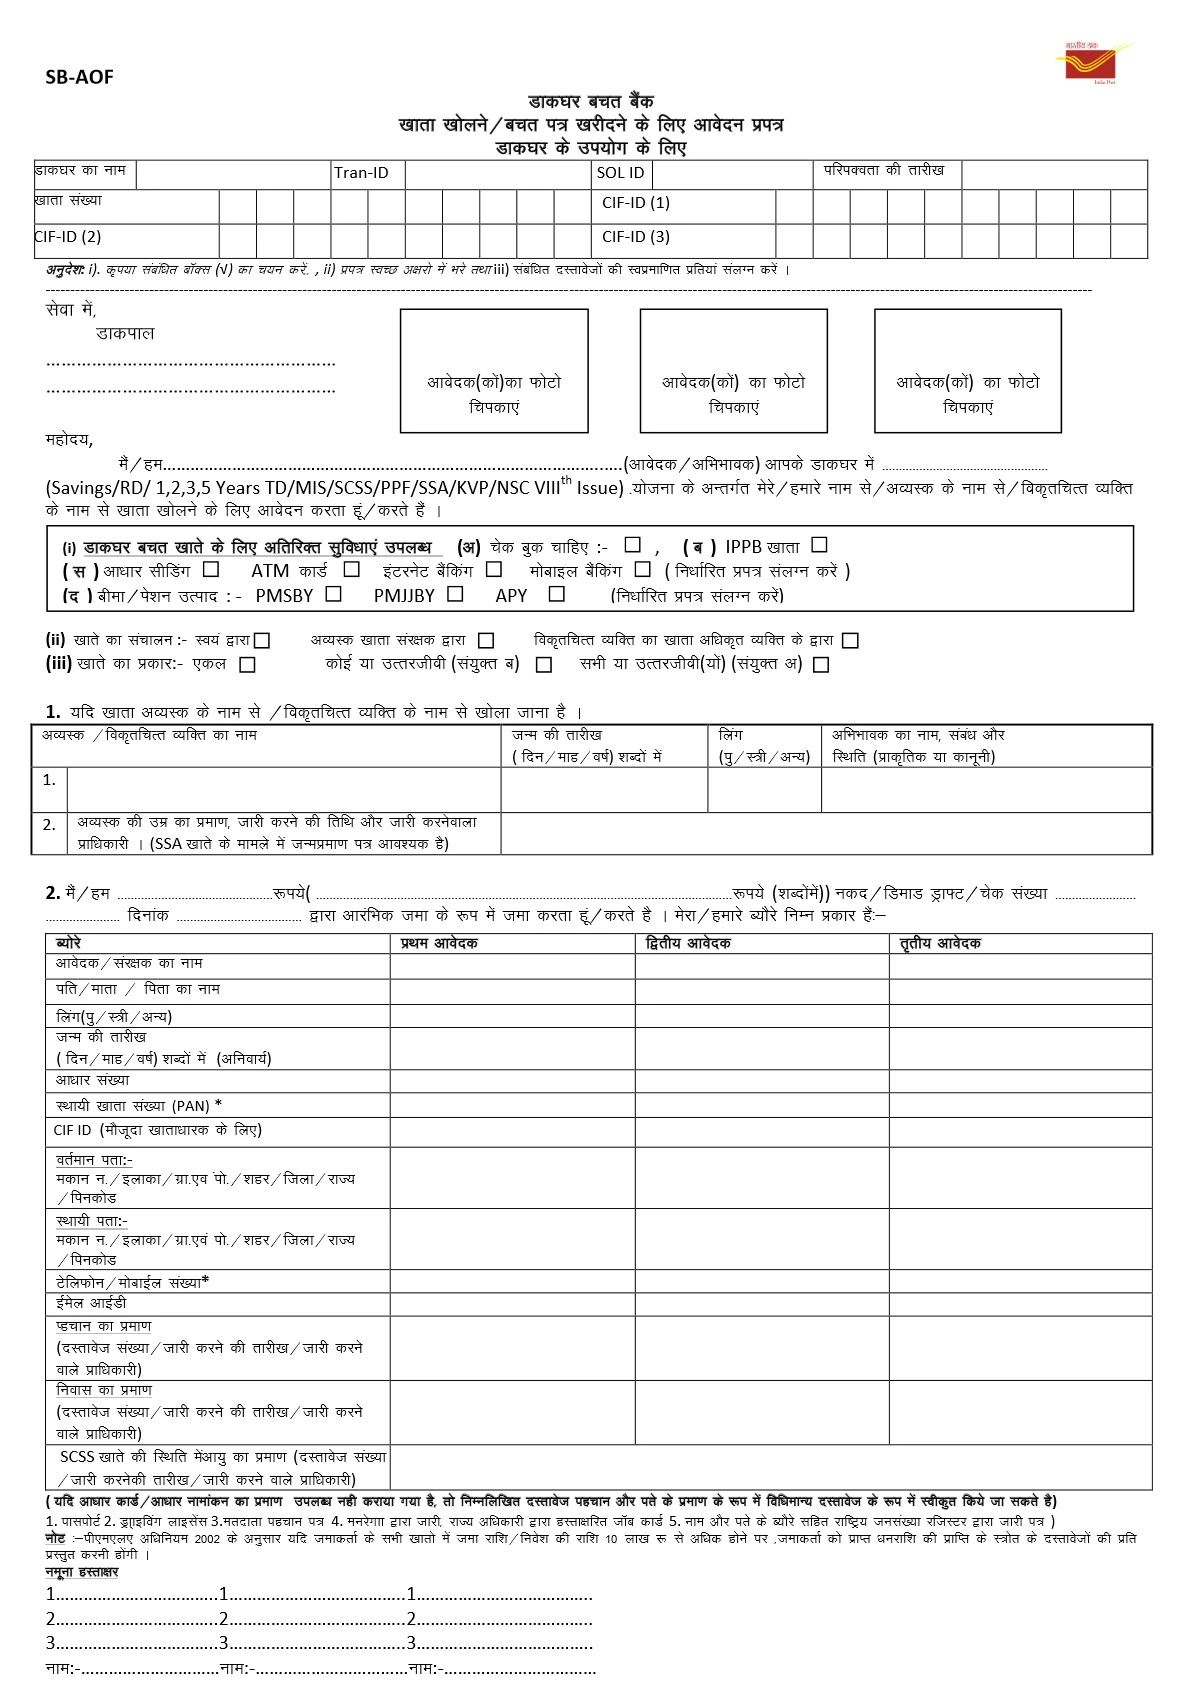 How to Fill Post Office Saving Account Opening Form